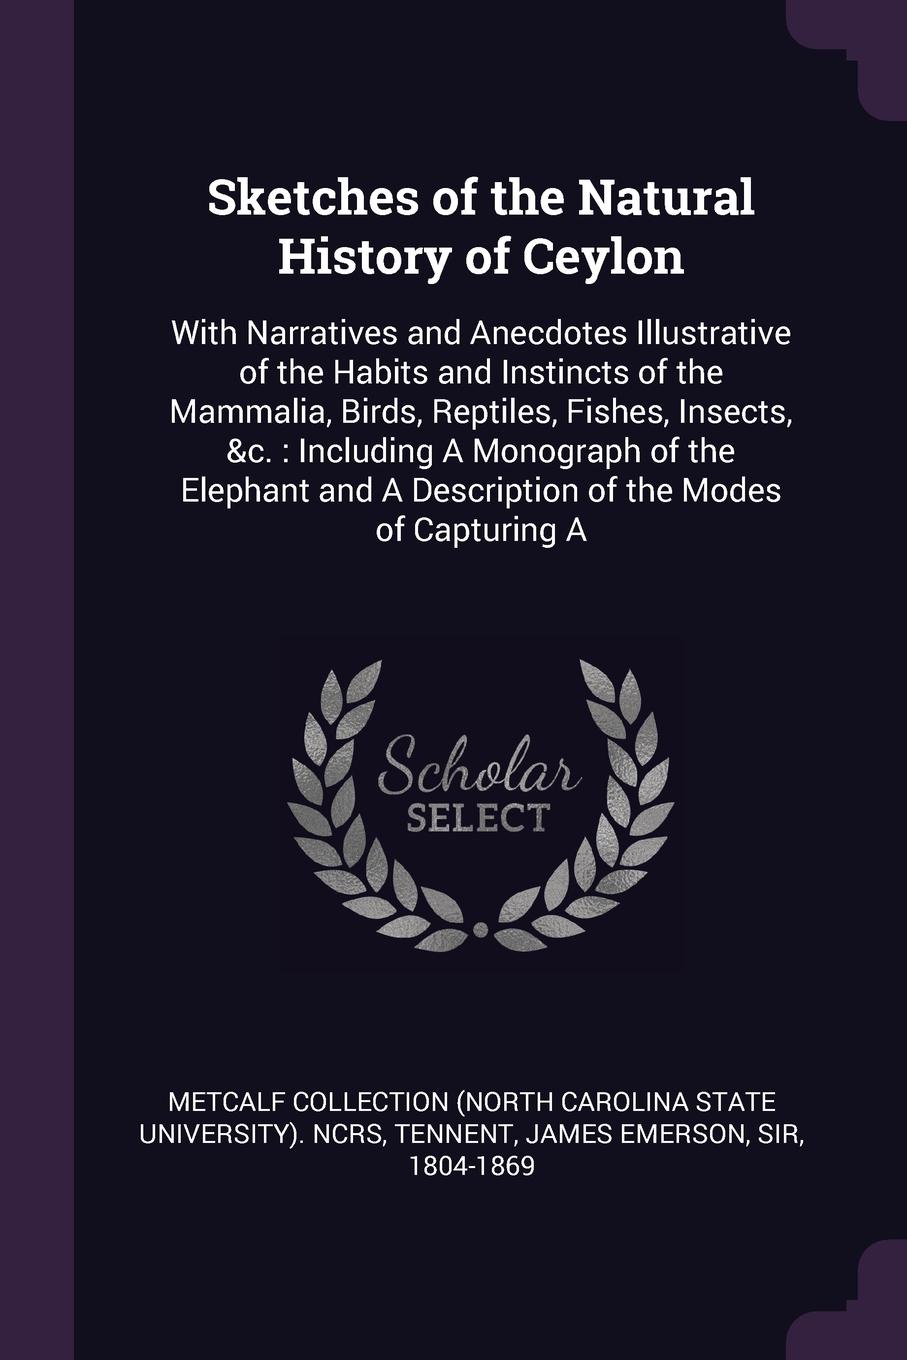 Sketches of the Natural History of Ceylon. With Narratives and Anecdotes Illustrative of the Habits and Instincts of the Mammalia, Birds, Reptiles, Fishes, Insects, &c. : Including A Monograph of the Elephant and A Description of the Modes of Capt...